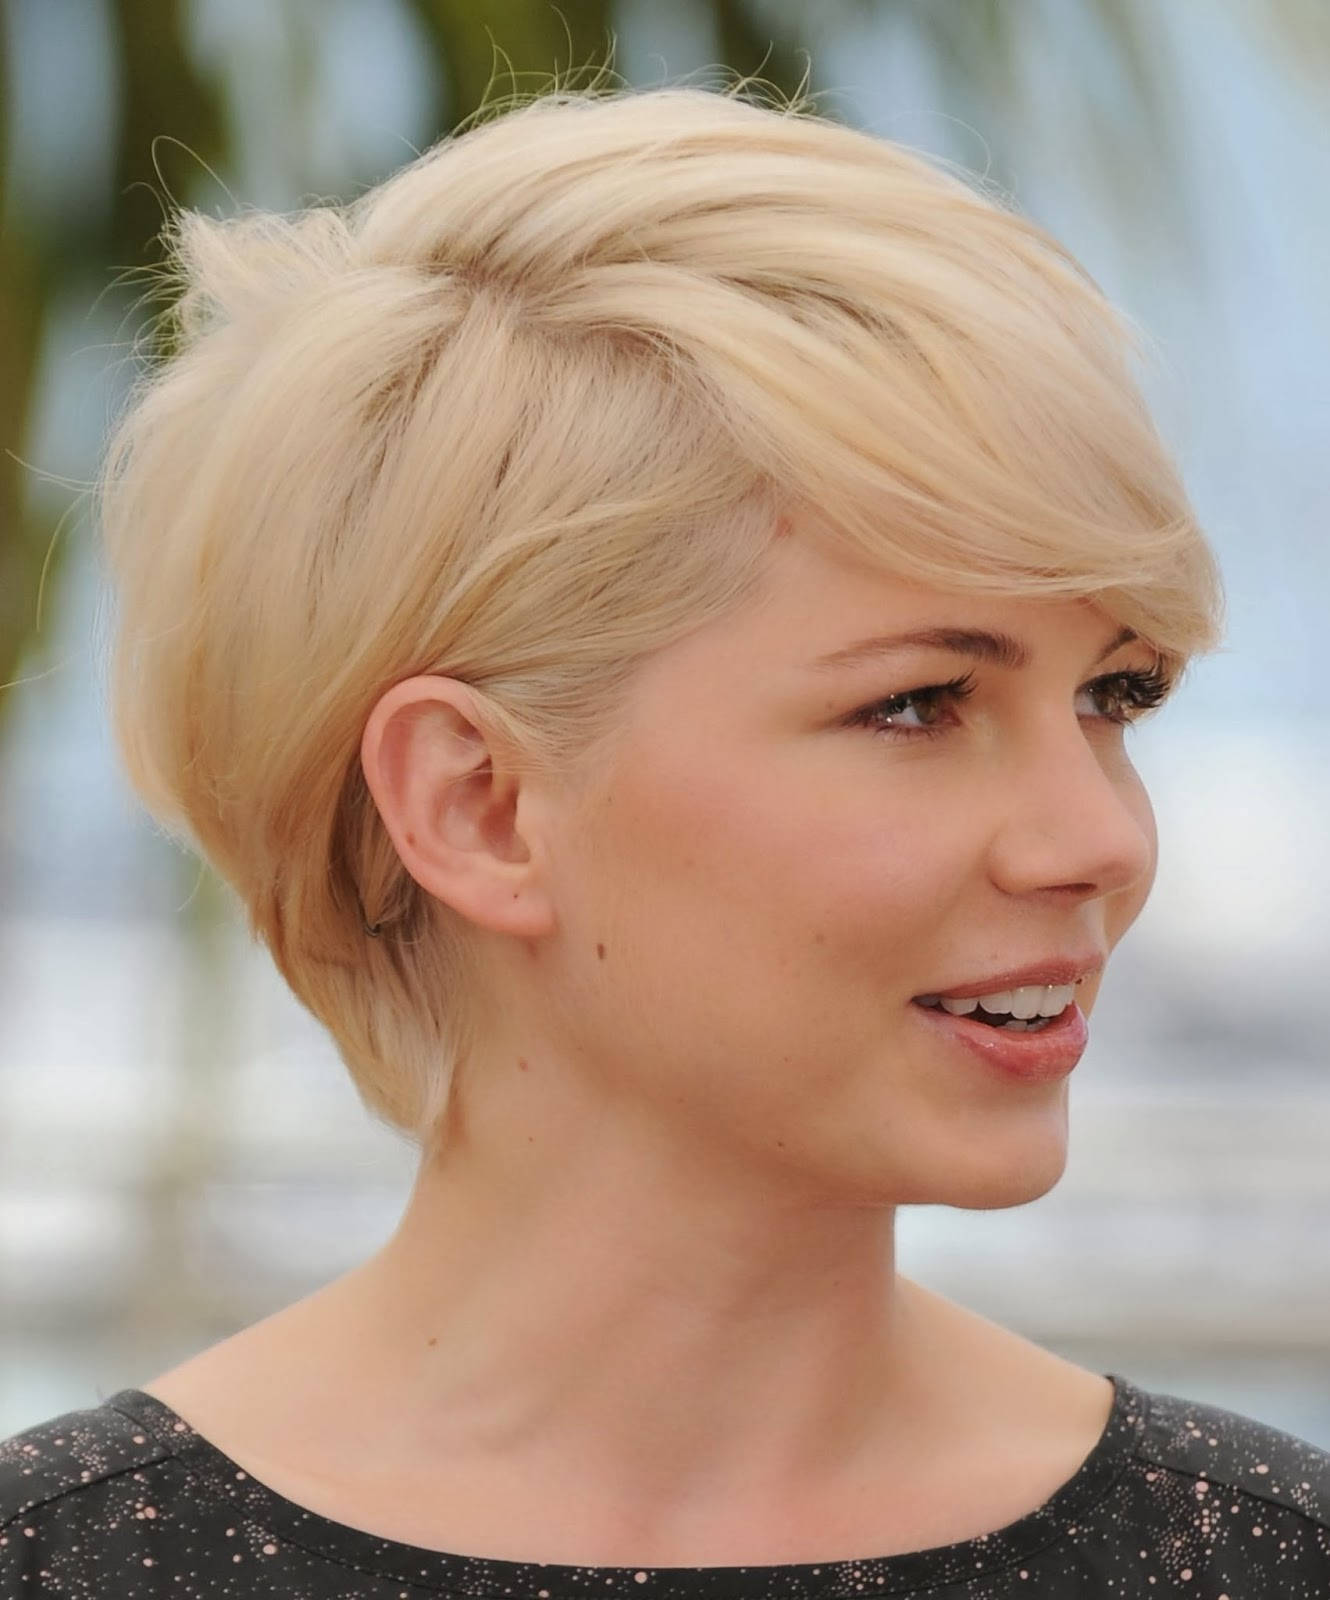 1. Michelle Williams Pixie Hair Side Angle Wallpaper